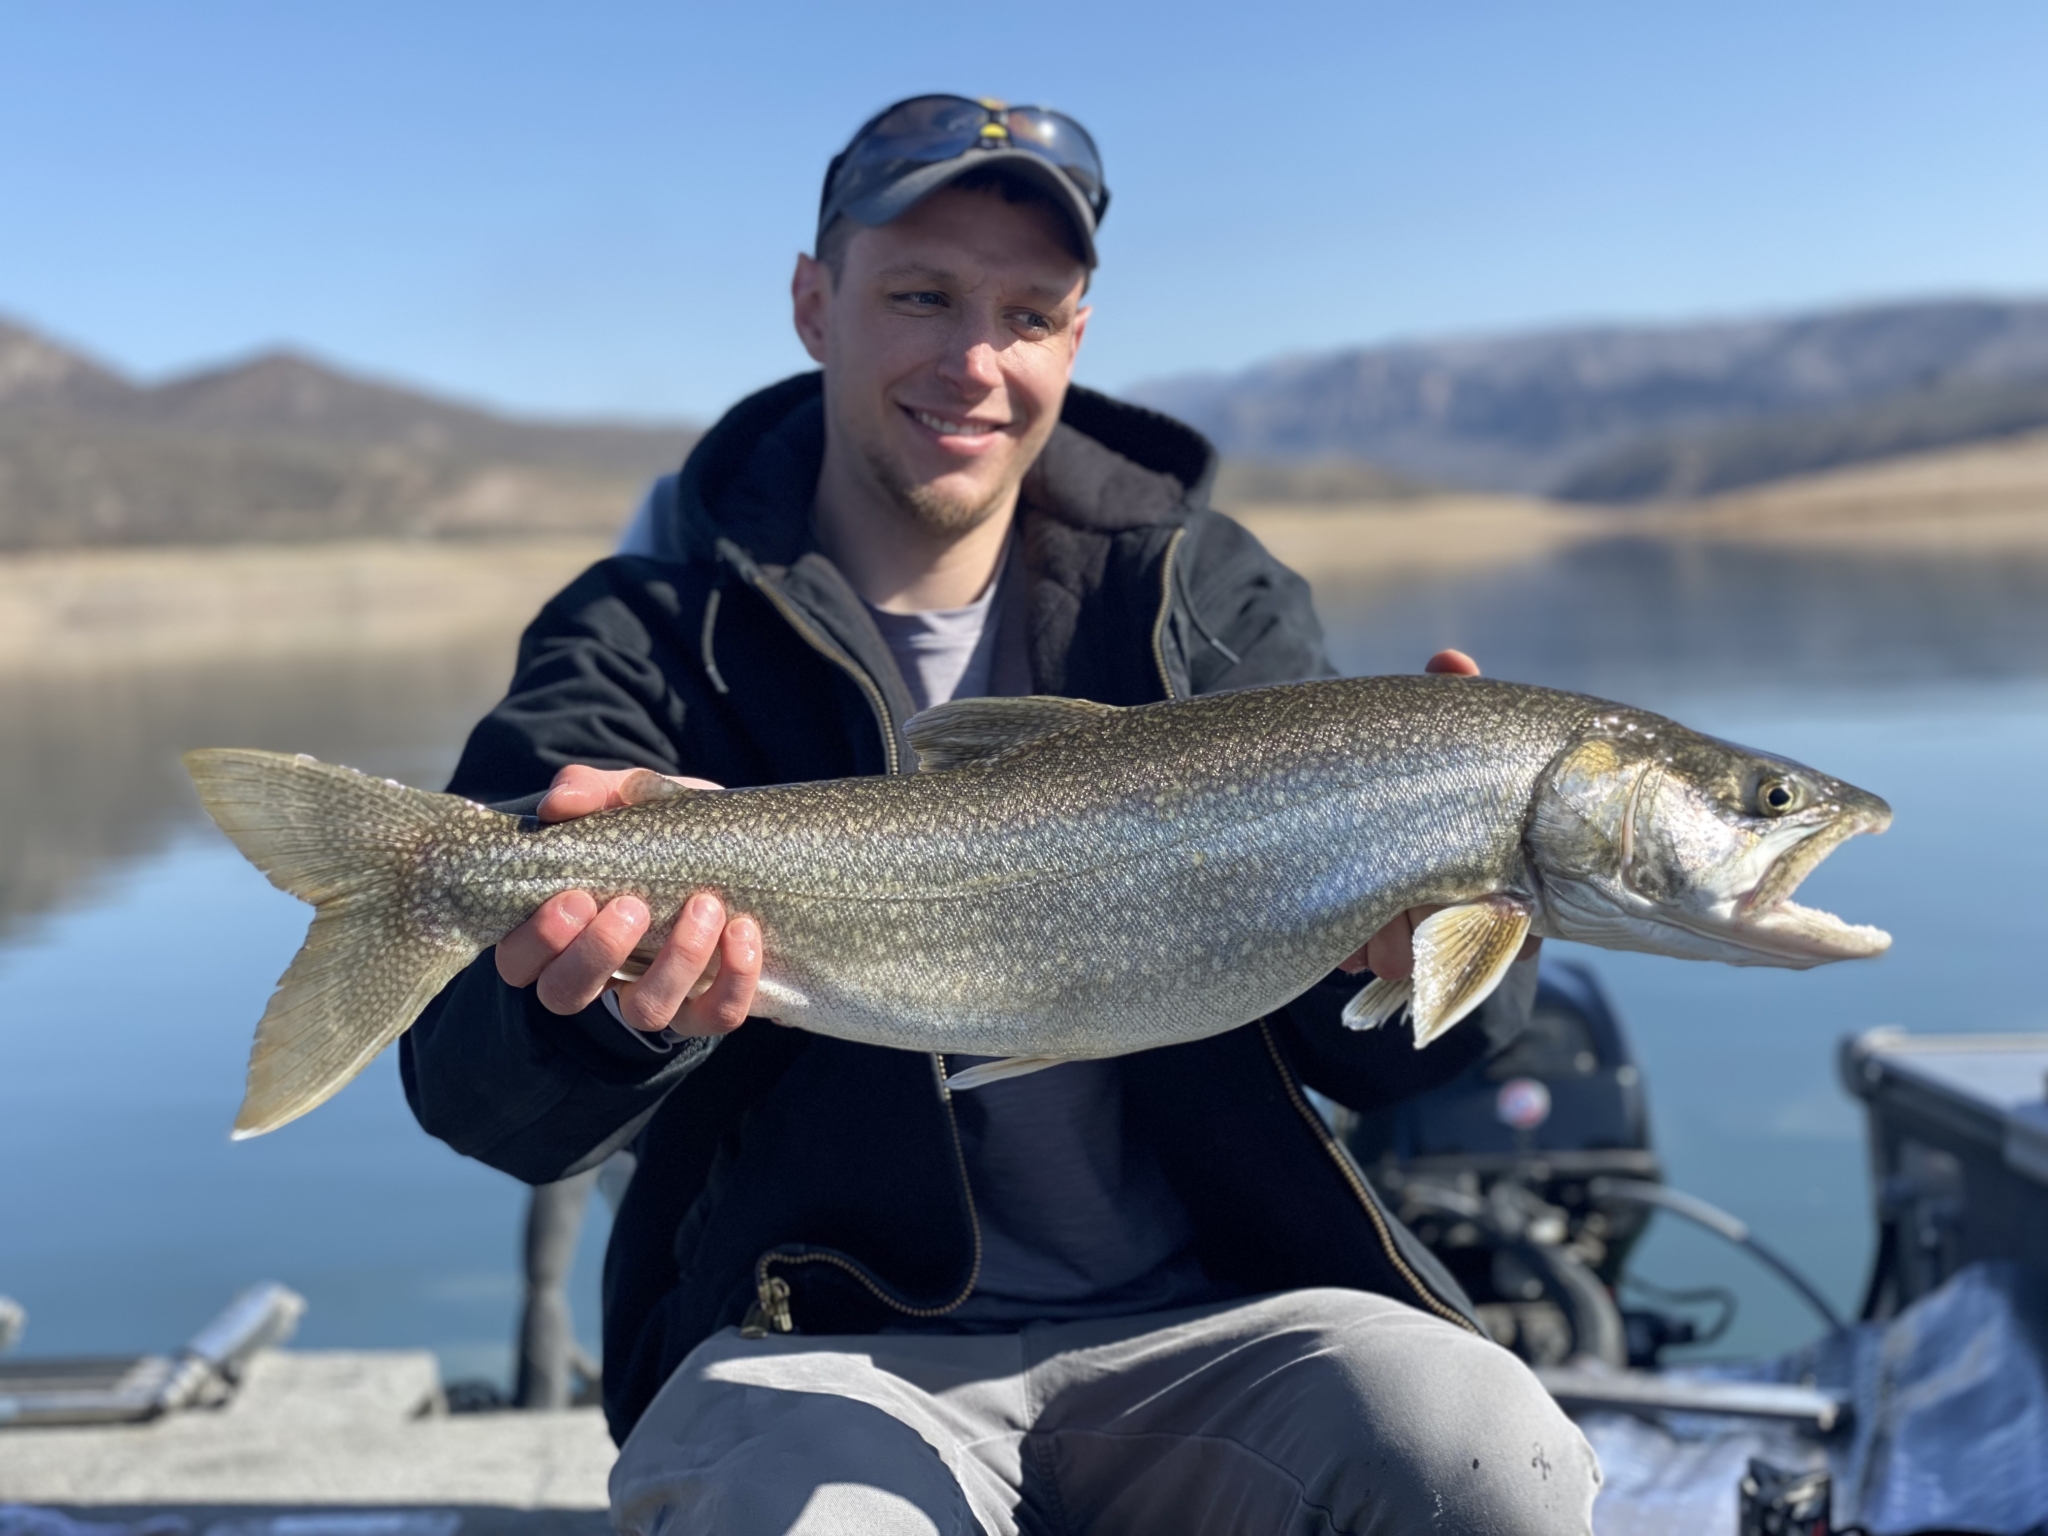 Blue Mesa Fishing Report boat ramp hours improve April 29th/Trout